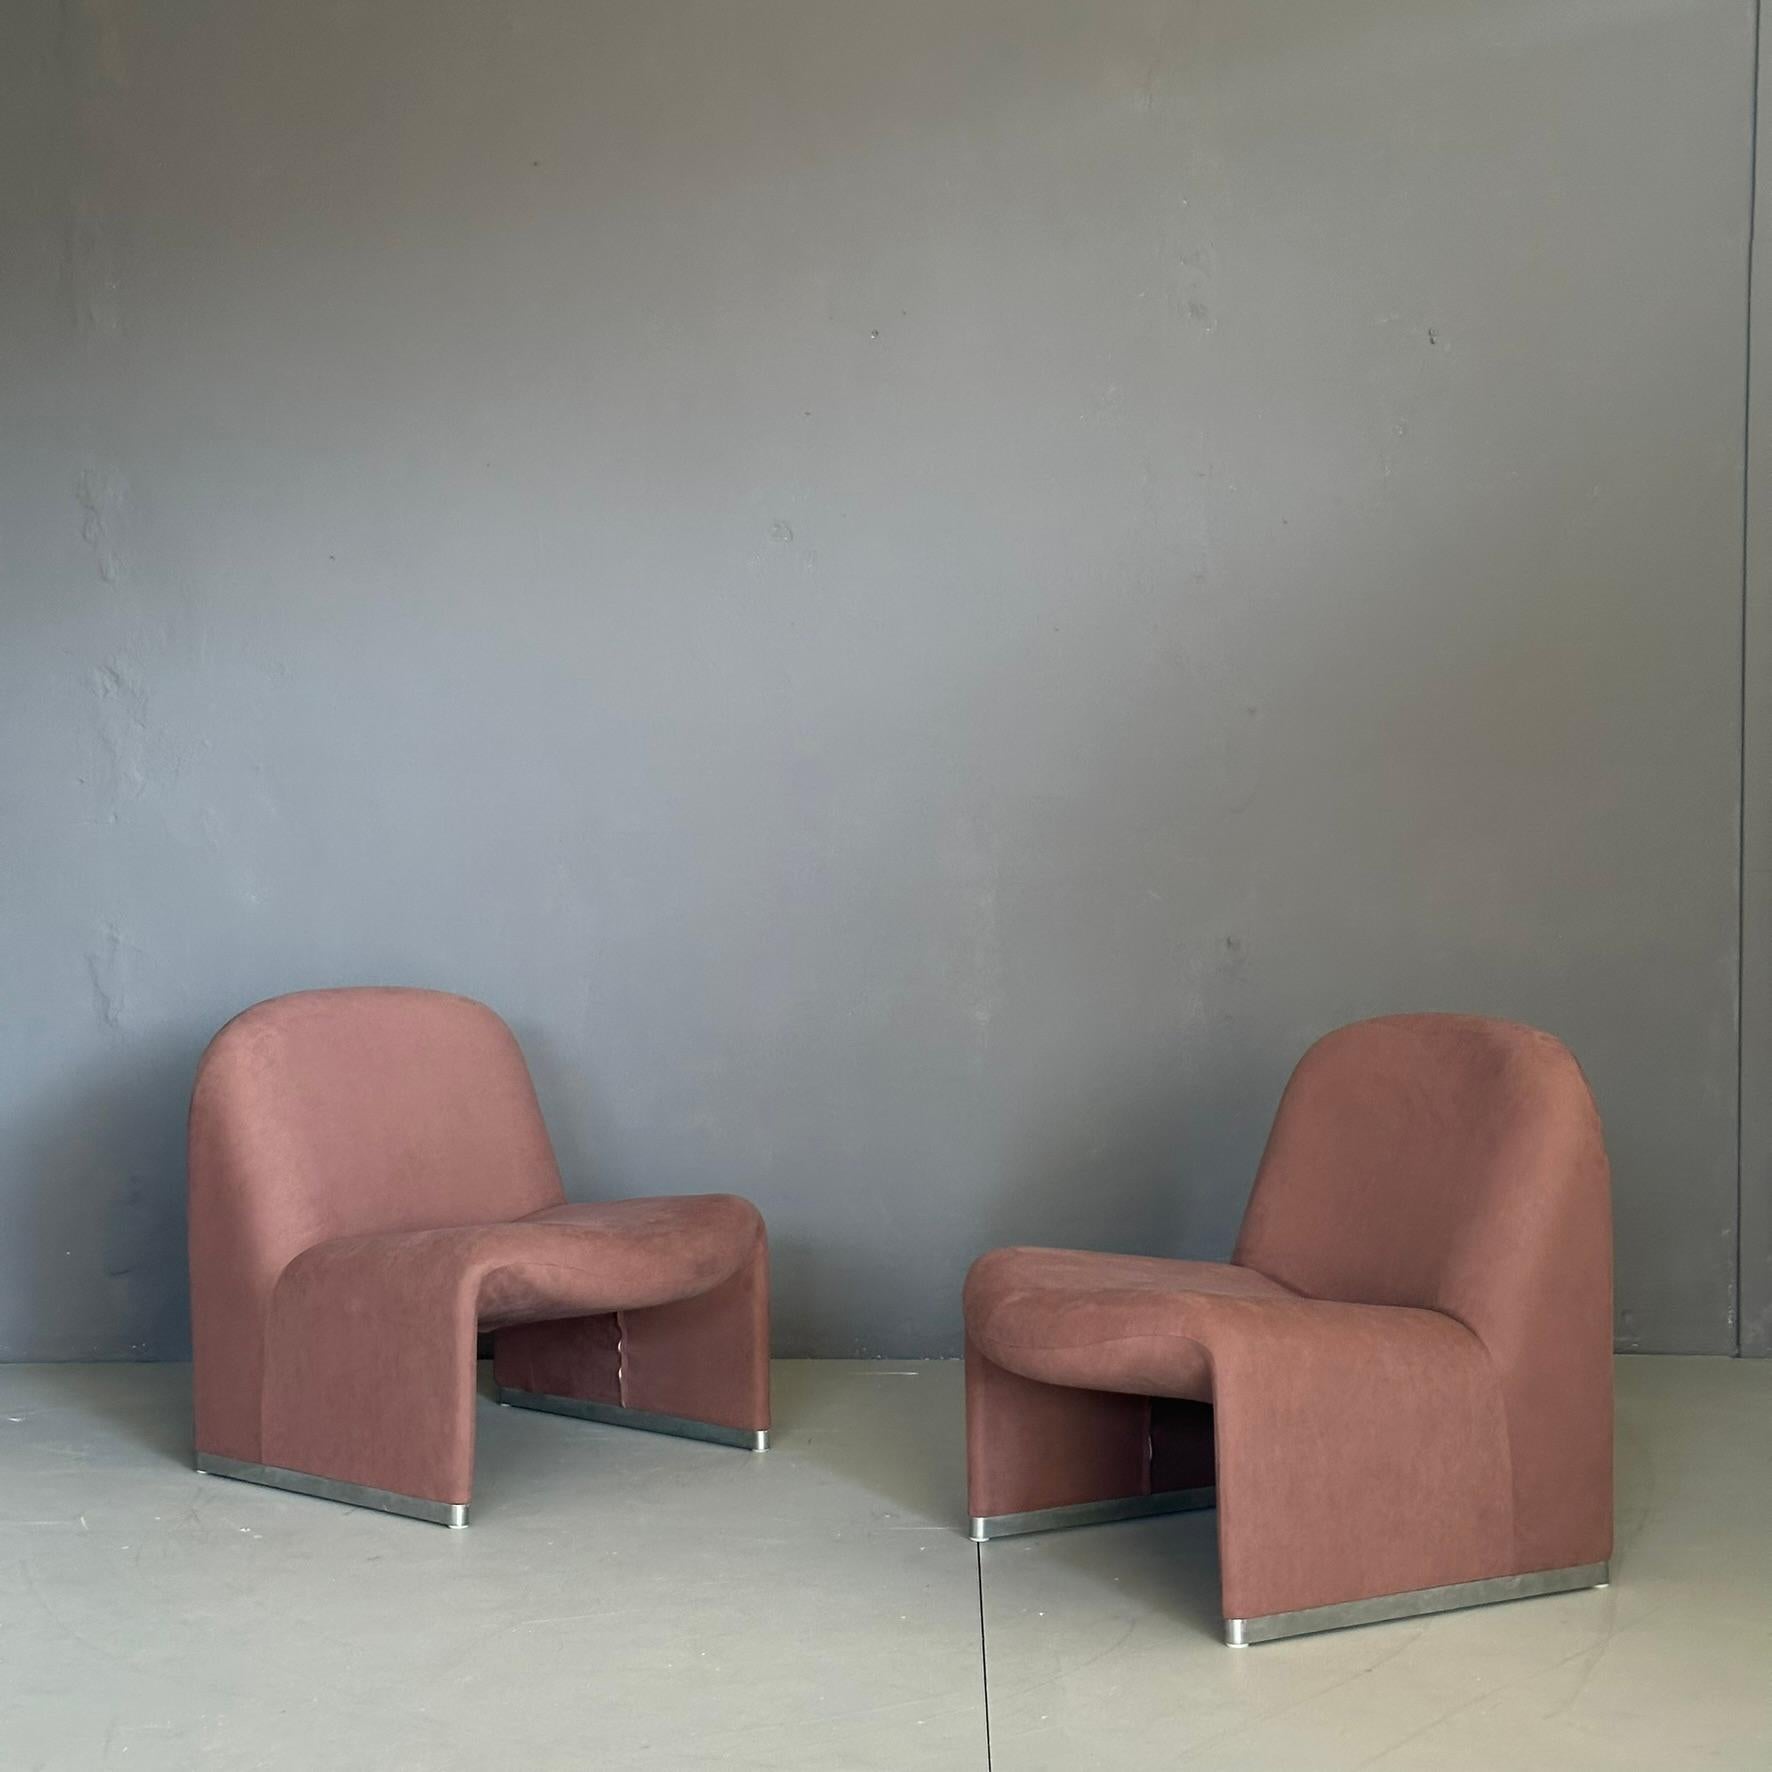 Pair of ALKY armchairs, design by Giancarlo Piretti for Anonima Castelli, 1970.
The armchair made with a metal frame and upholstery in old-purple elastic fabric.
Design with soft and enveloping lines.
The upholstery fabric is new.

Very good